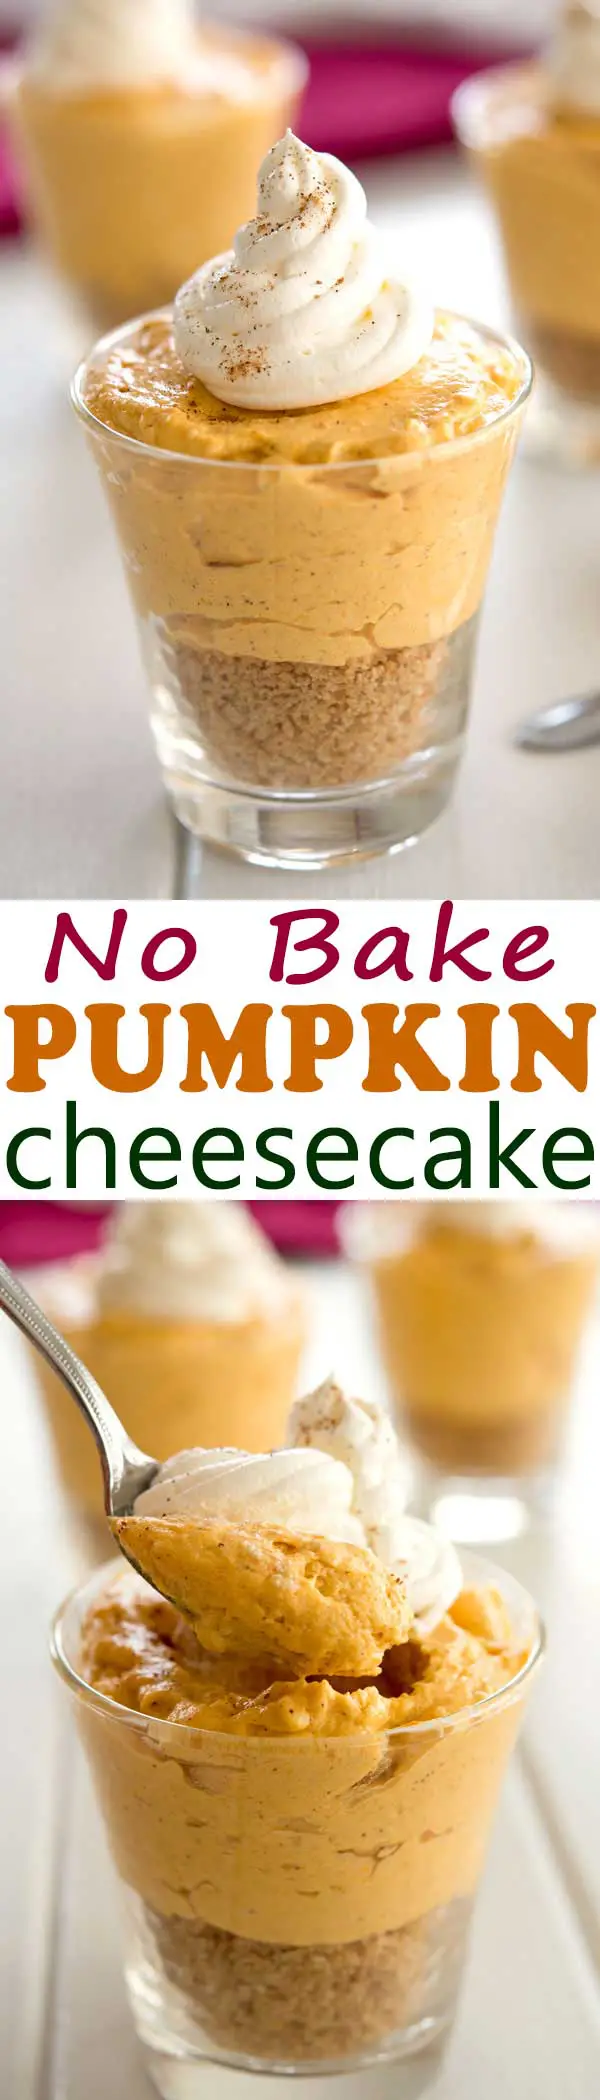 Easy no bake pumpkin cheesecake served in a jar or mini cups for a cute Thanksgiving or Fall dessert recipe! #dessert #thanksgiving #pumpkin